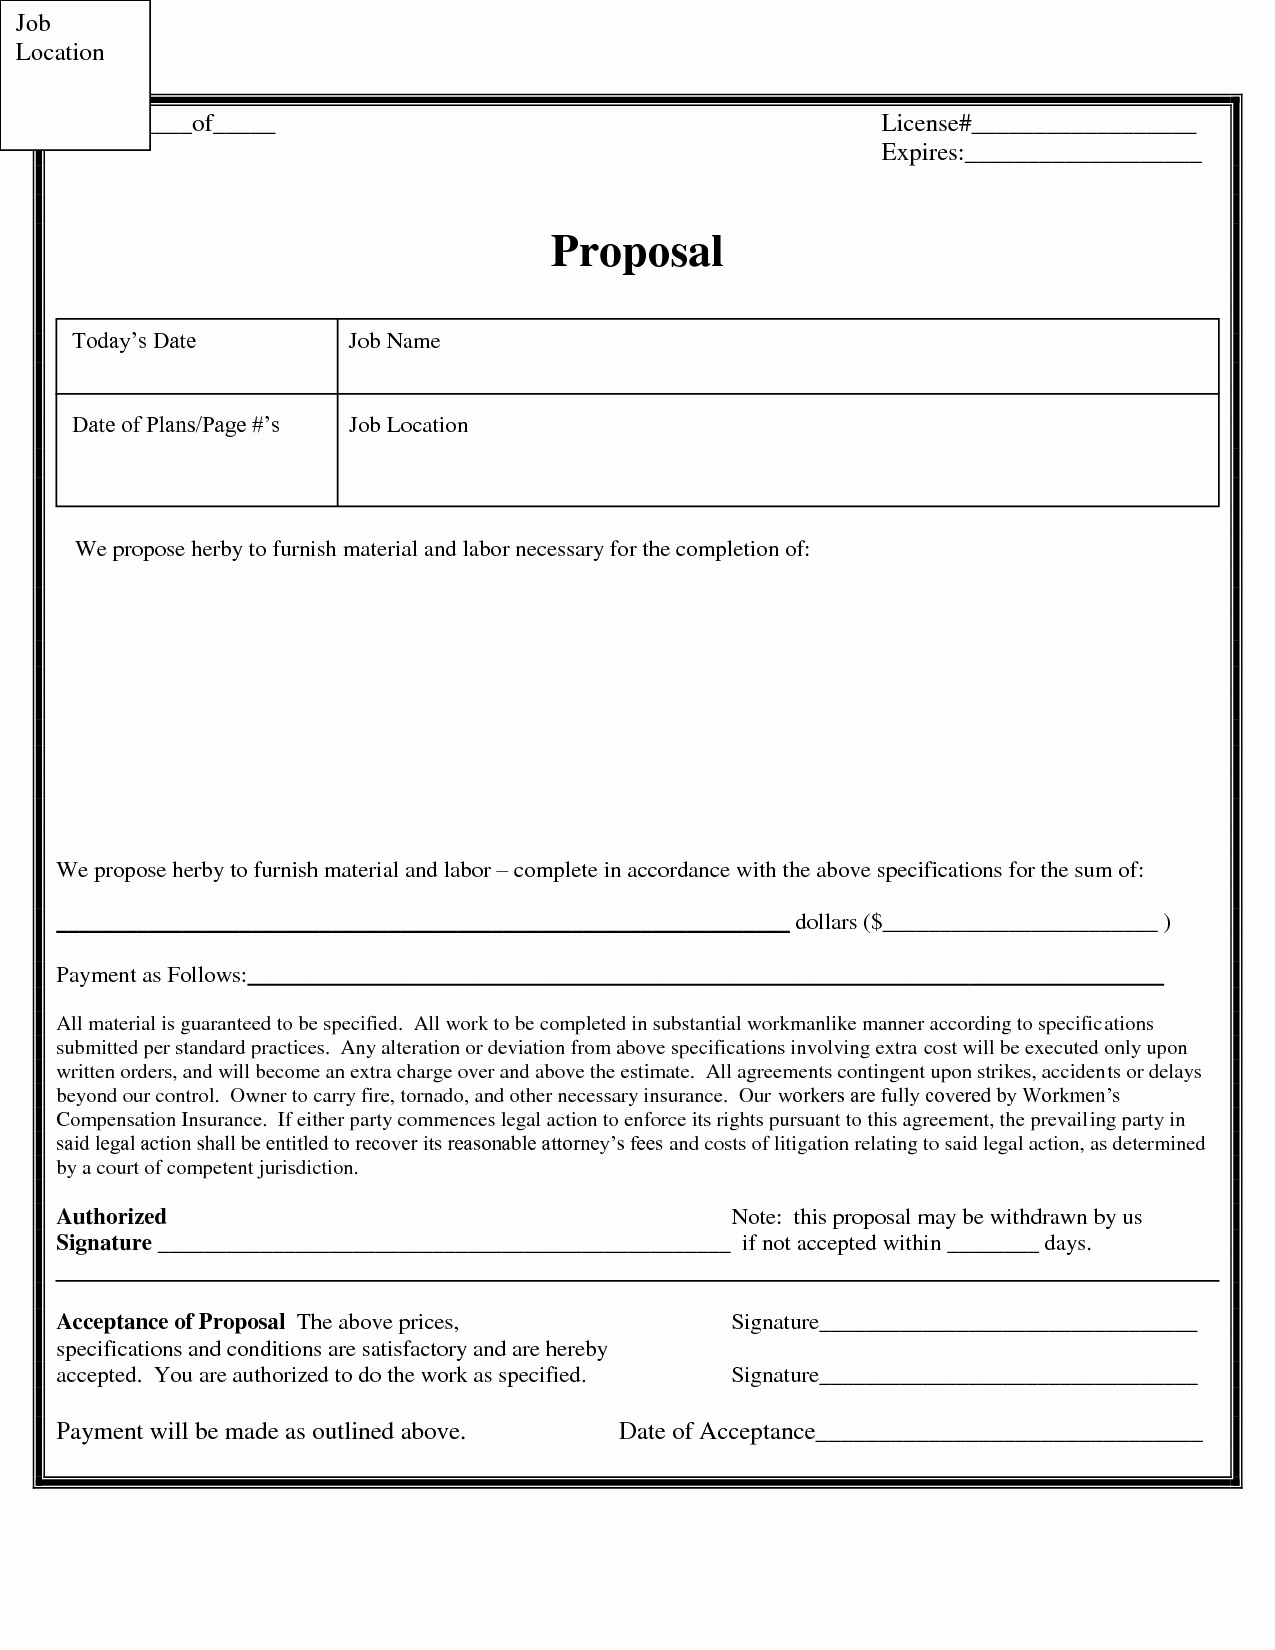 Free Proposal form Template Lovely 9 Best Of totally Free Proposal Templates